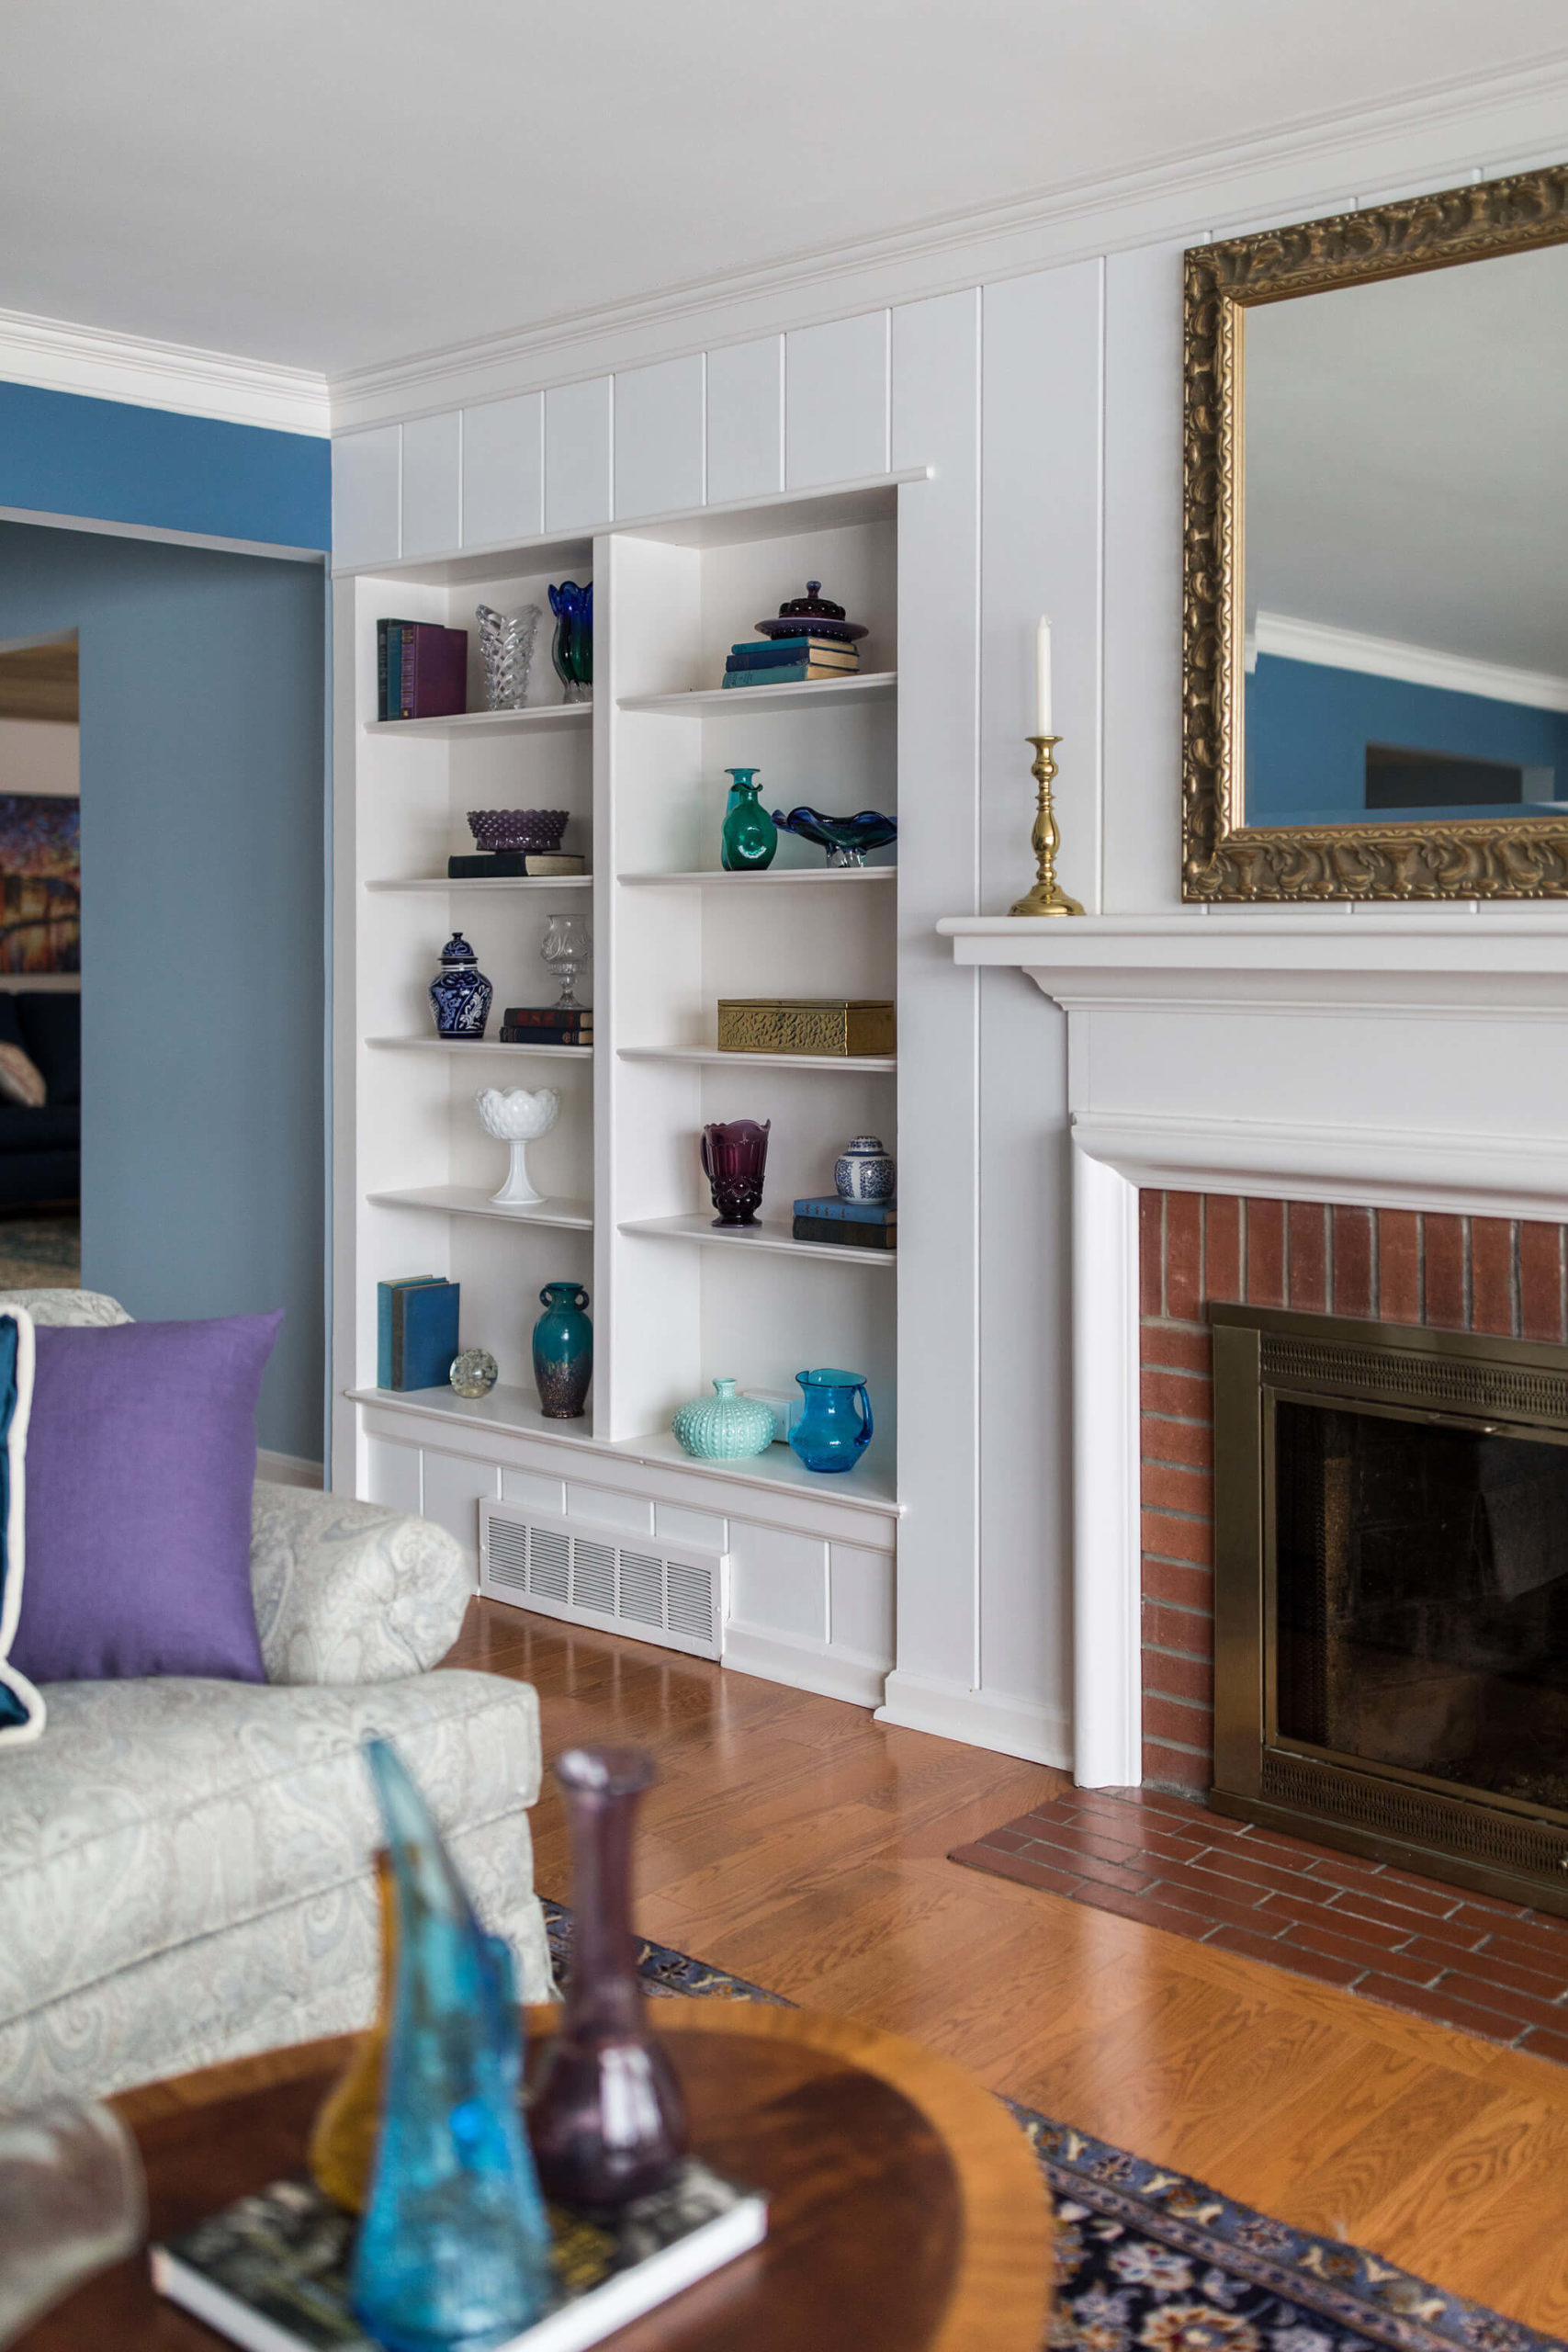 Family Room Built-in Shelves After Eclectic Interiors